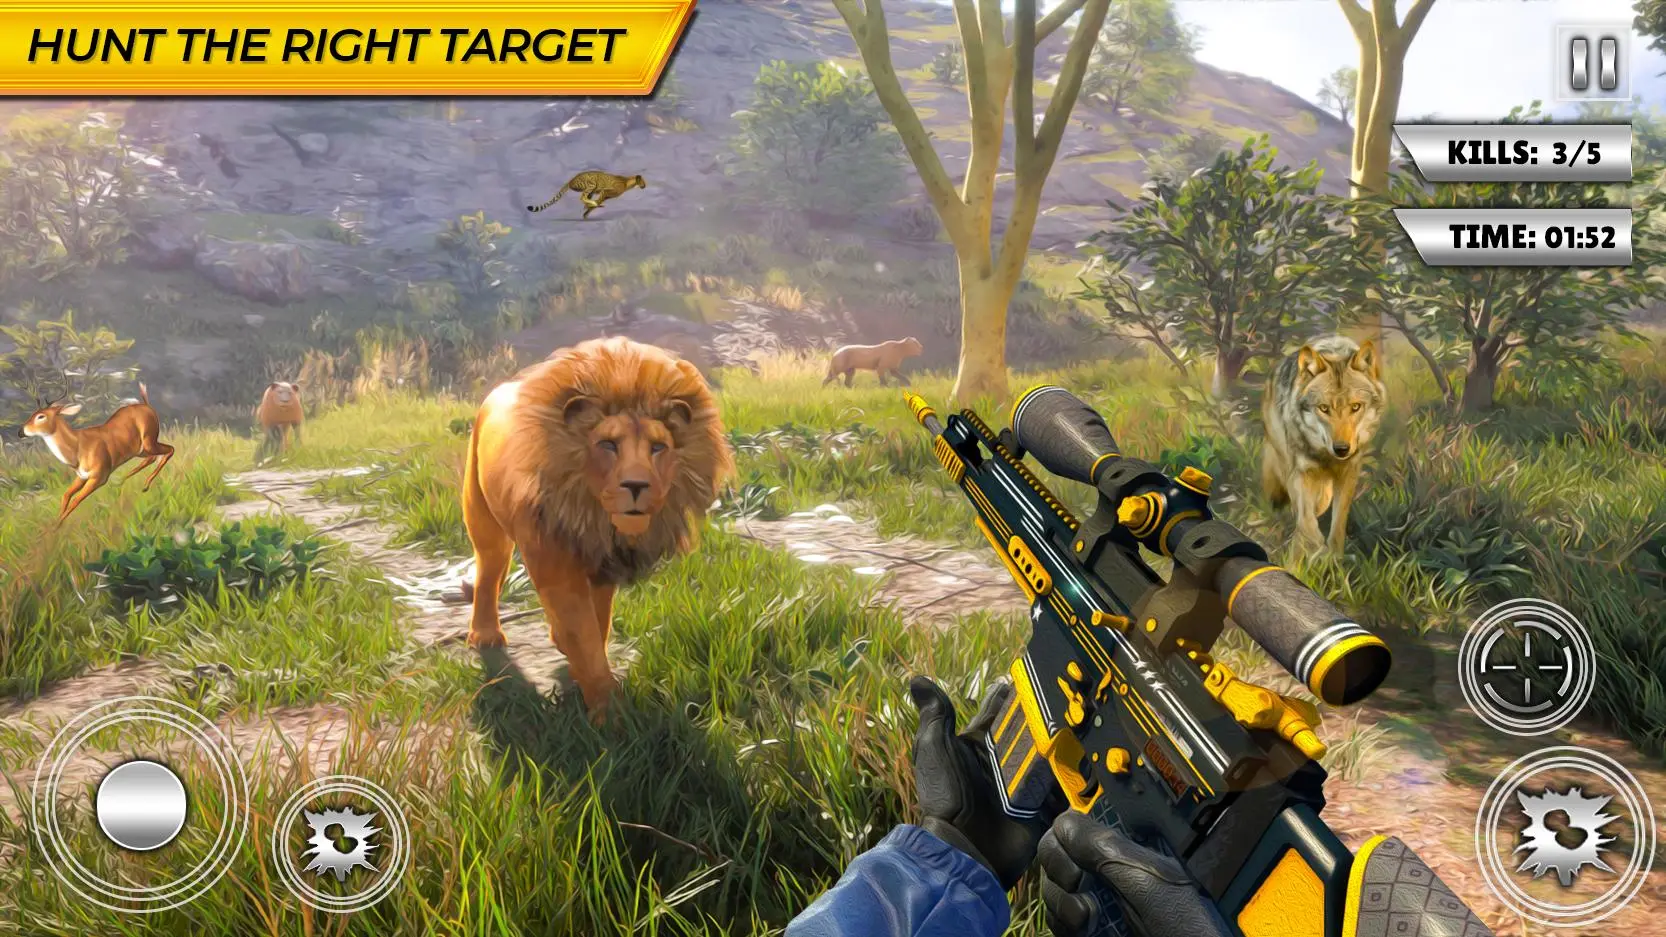 Download Wild Animal Hunting Games Gun android on PC